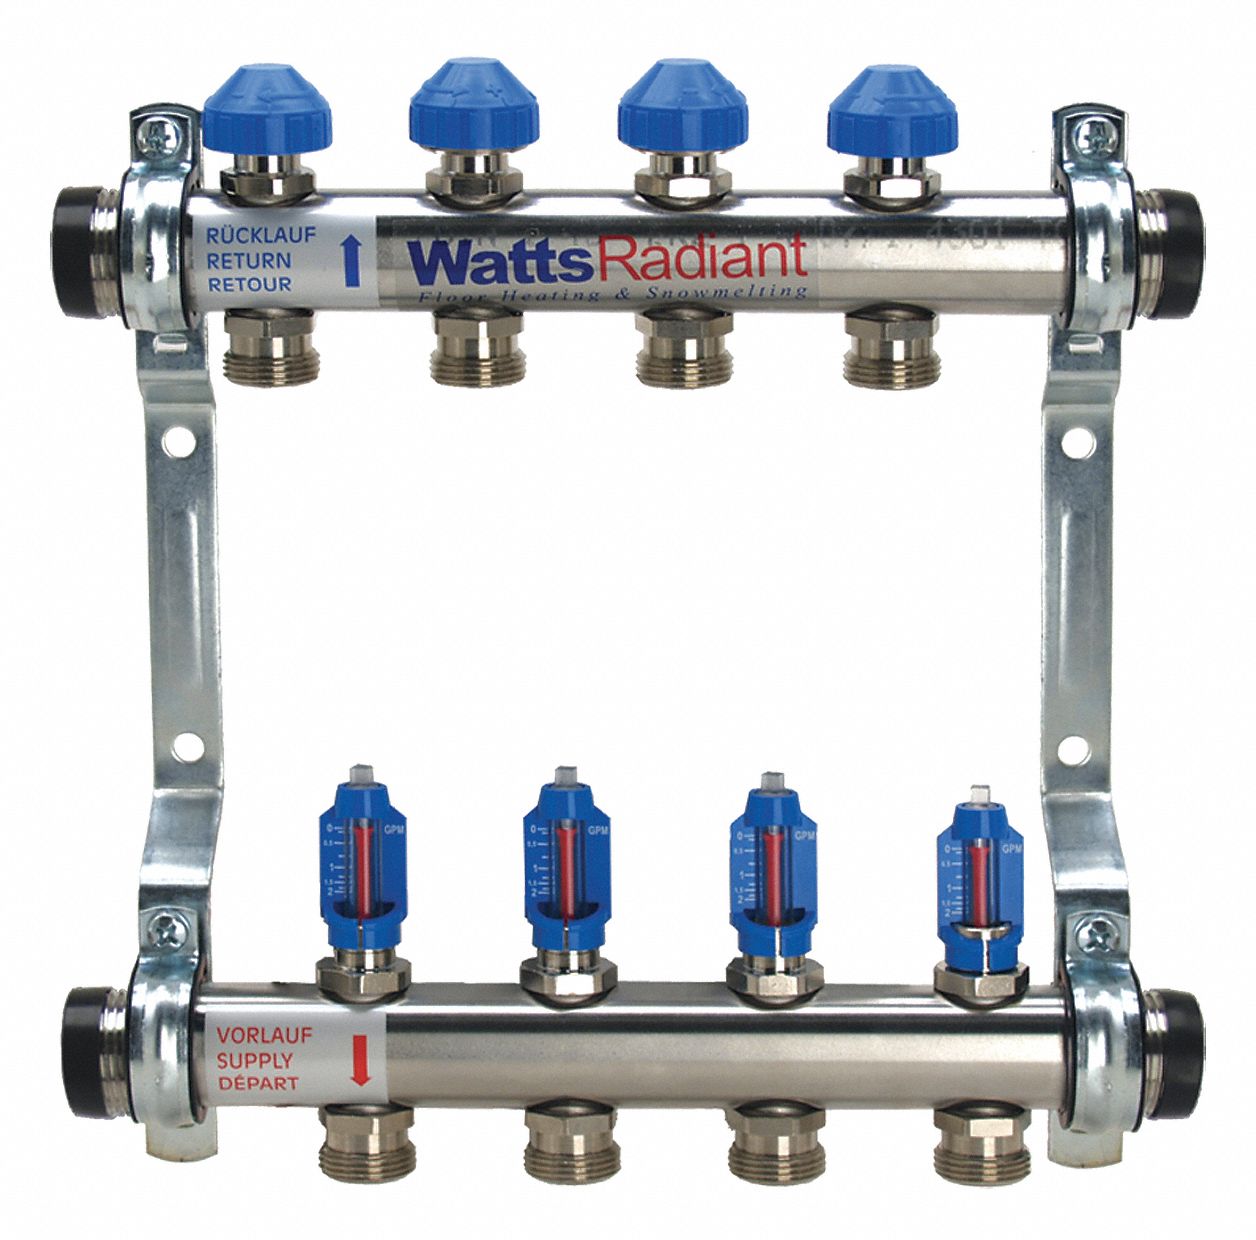 Flowmeter Manifold: 1 Inlets, 4 Outlets, 1 in Inlet Size, 1 in Outlet Size